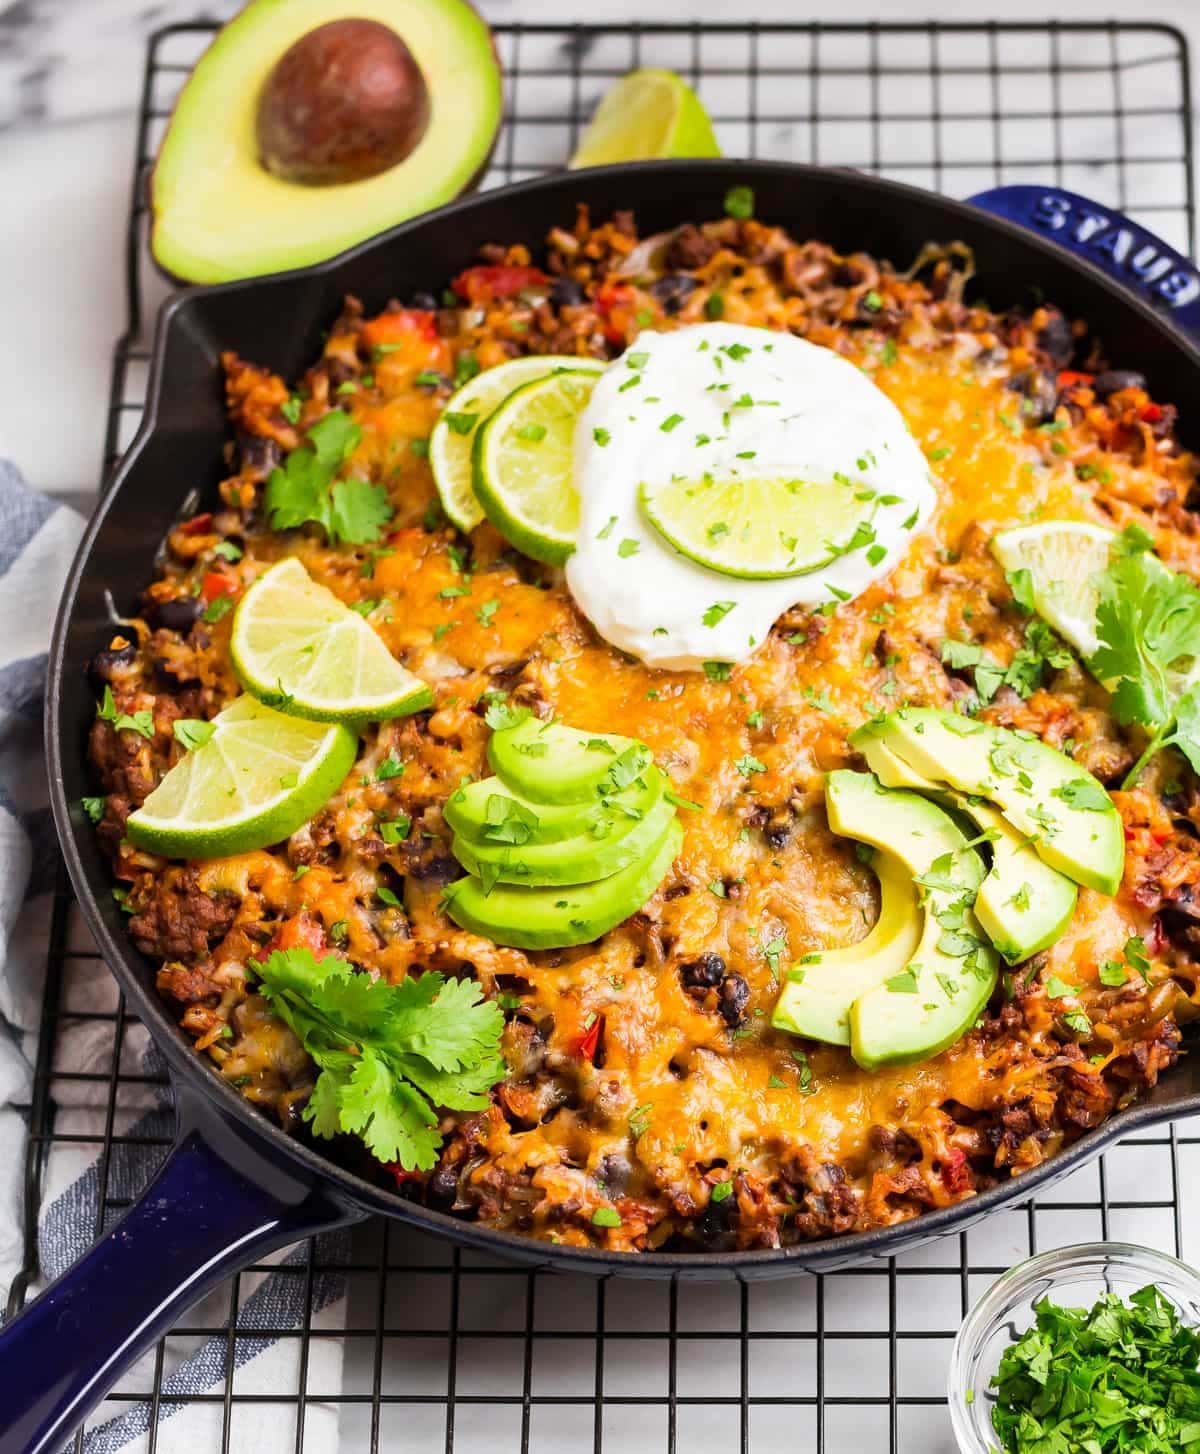 Cast iron pan with lean, ground beef, rice, black beans, cheese and garnished with slice lime, avocados and chopped parsley